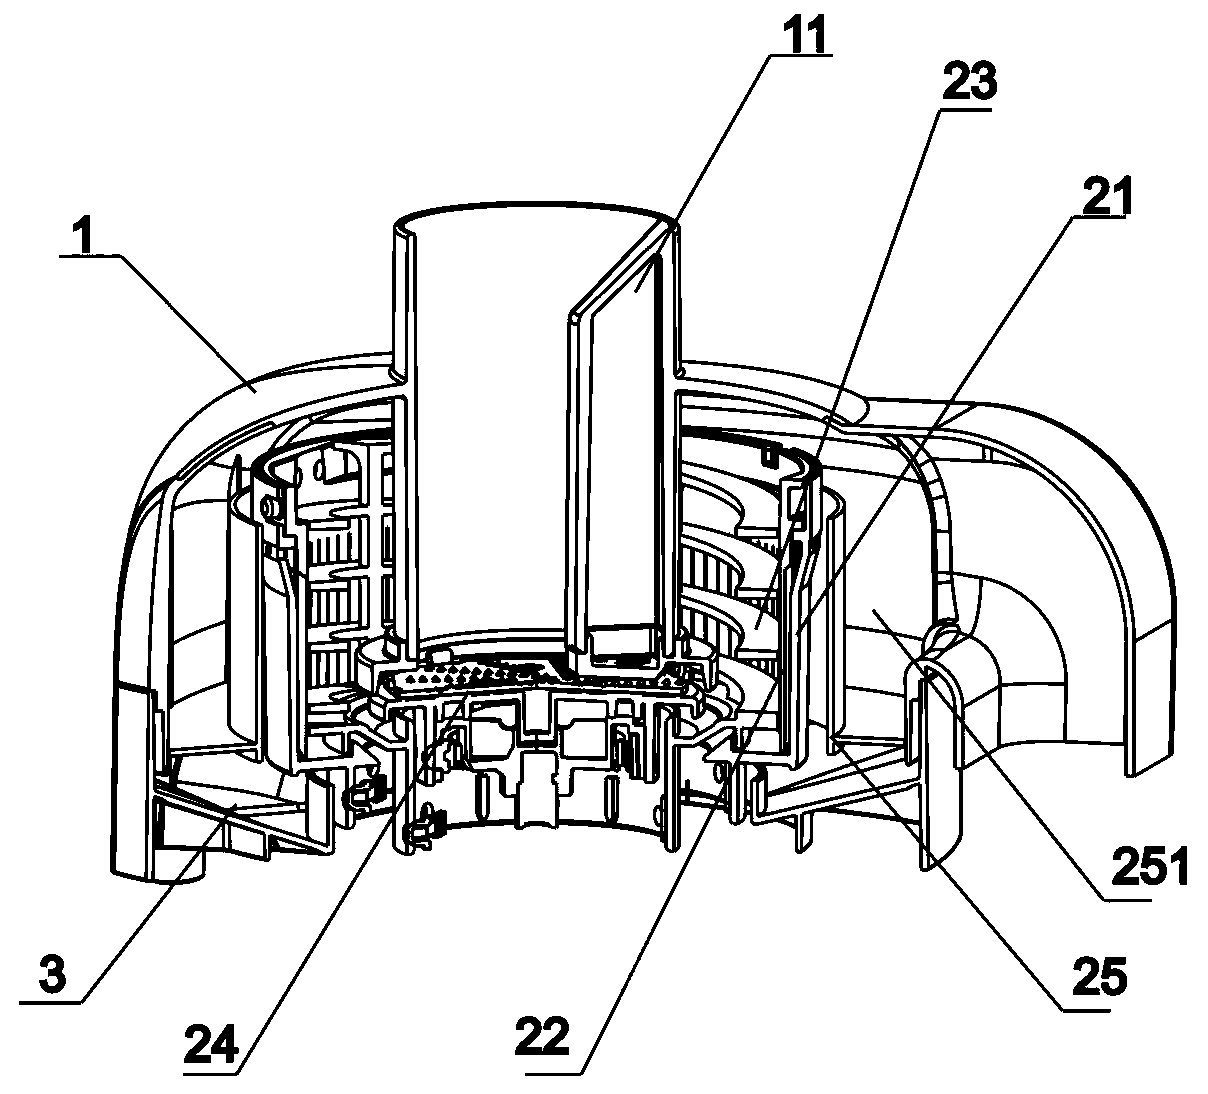 Juicer capable of automatically discharging residues